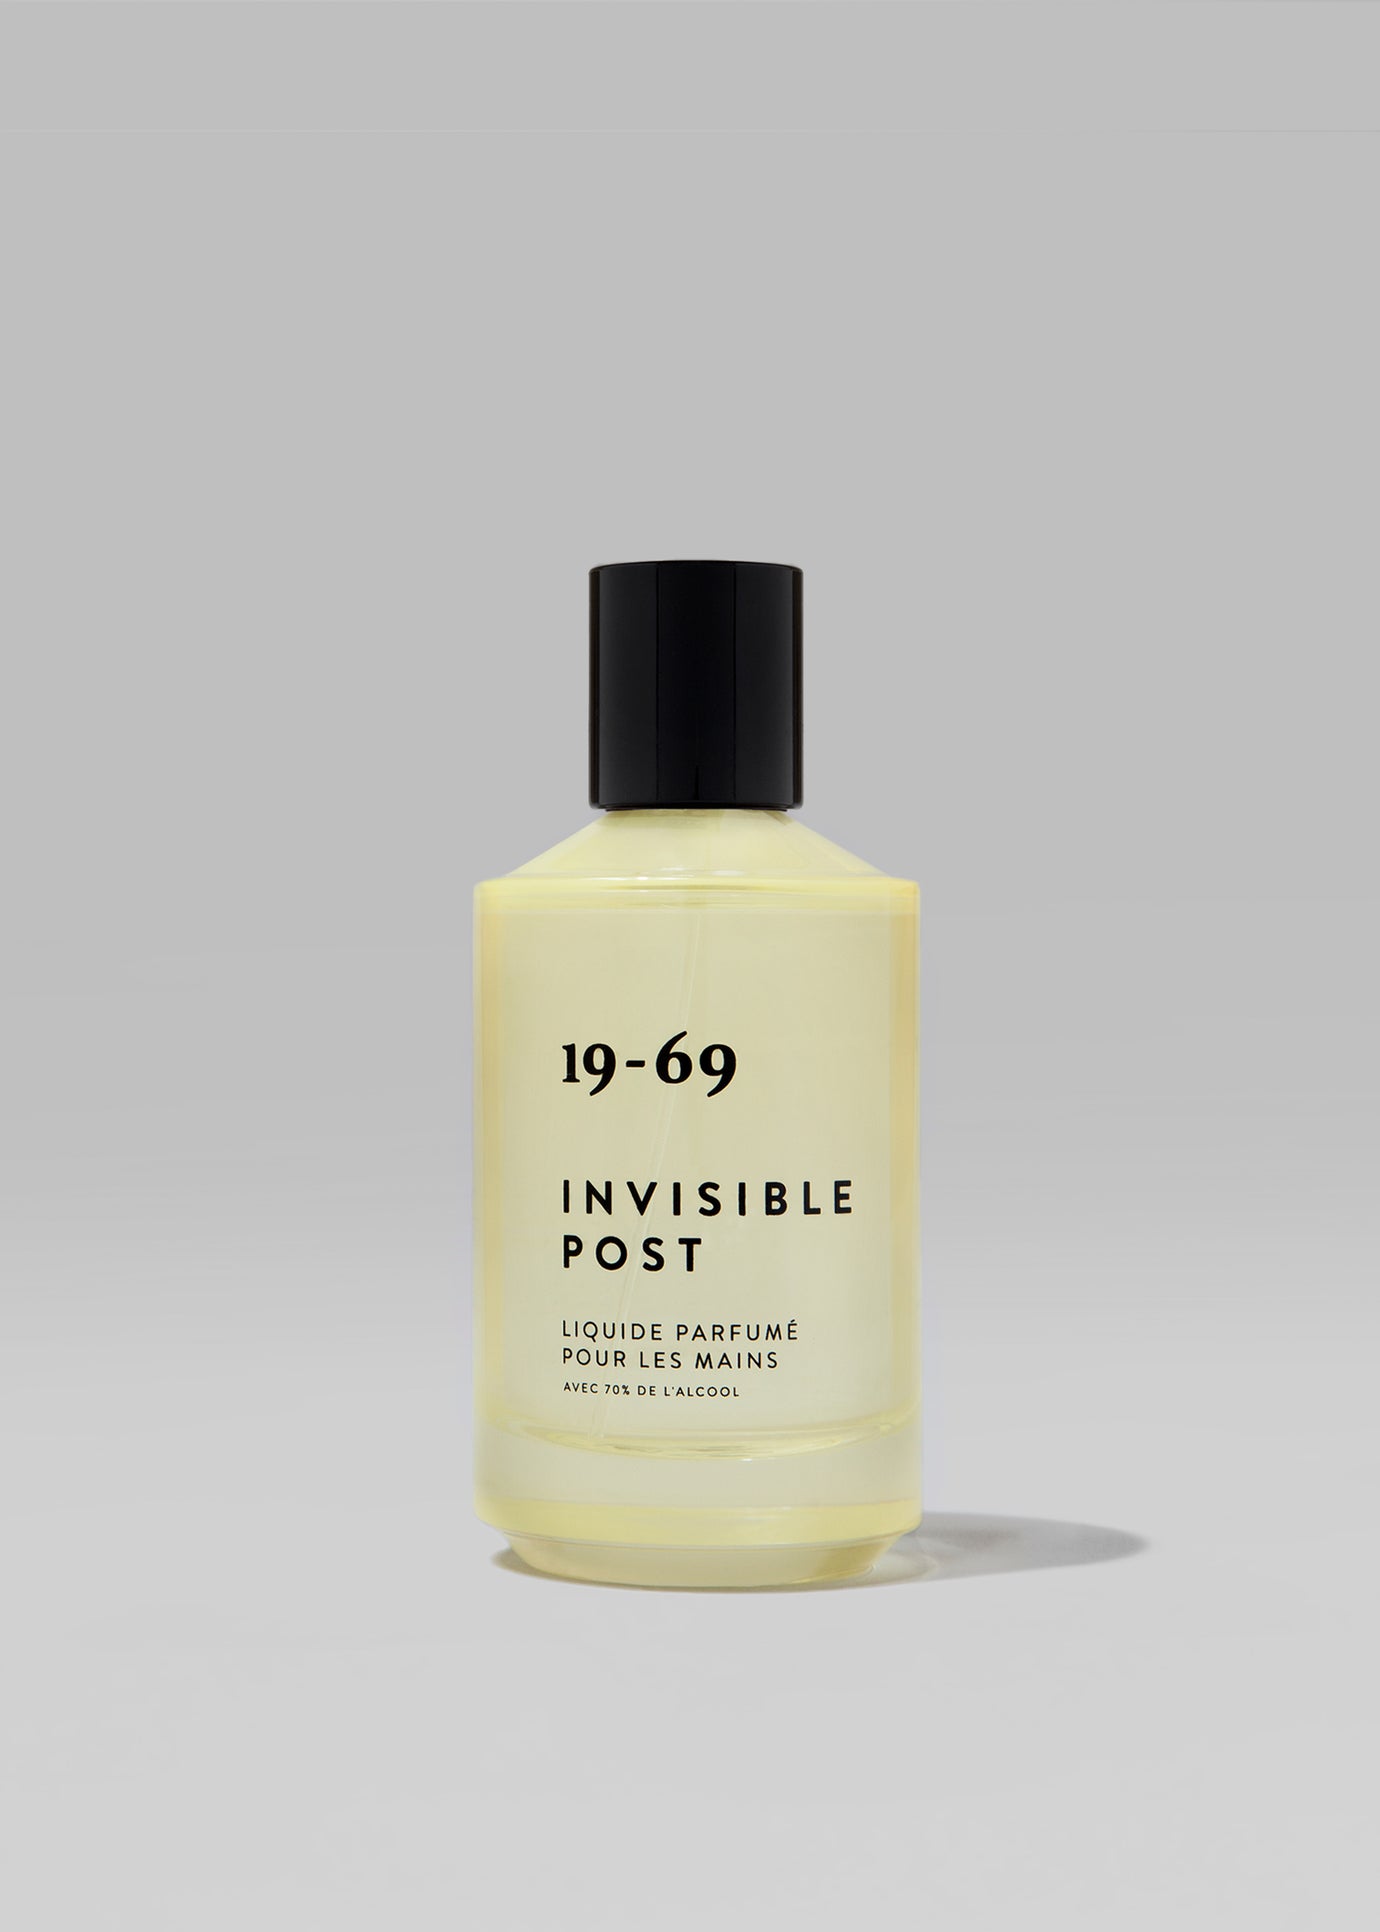 19-69 Invisible Post Hand Sanitizing Spray